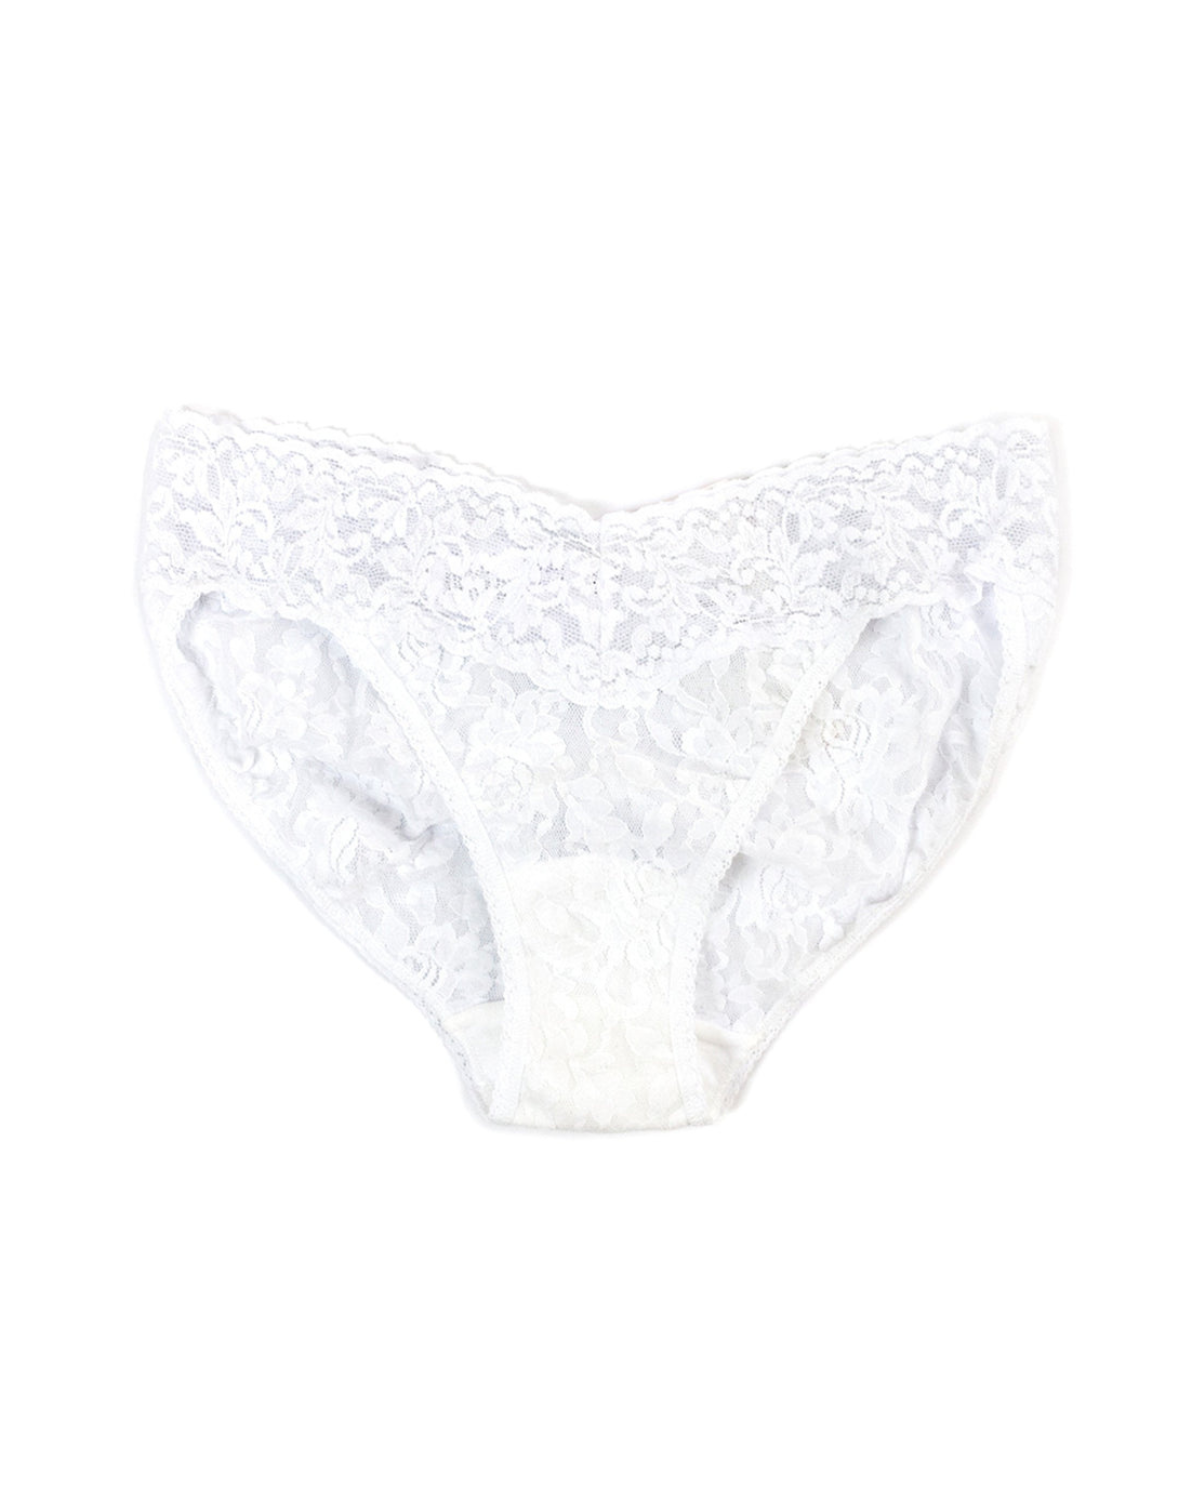 Flat lay of a lace v-kini brief panty in white